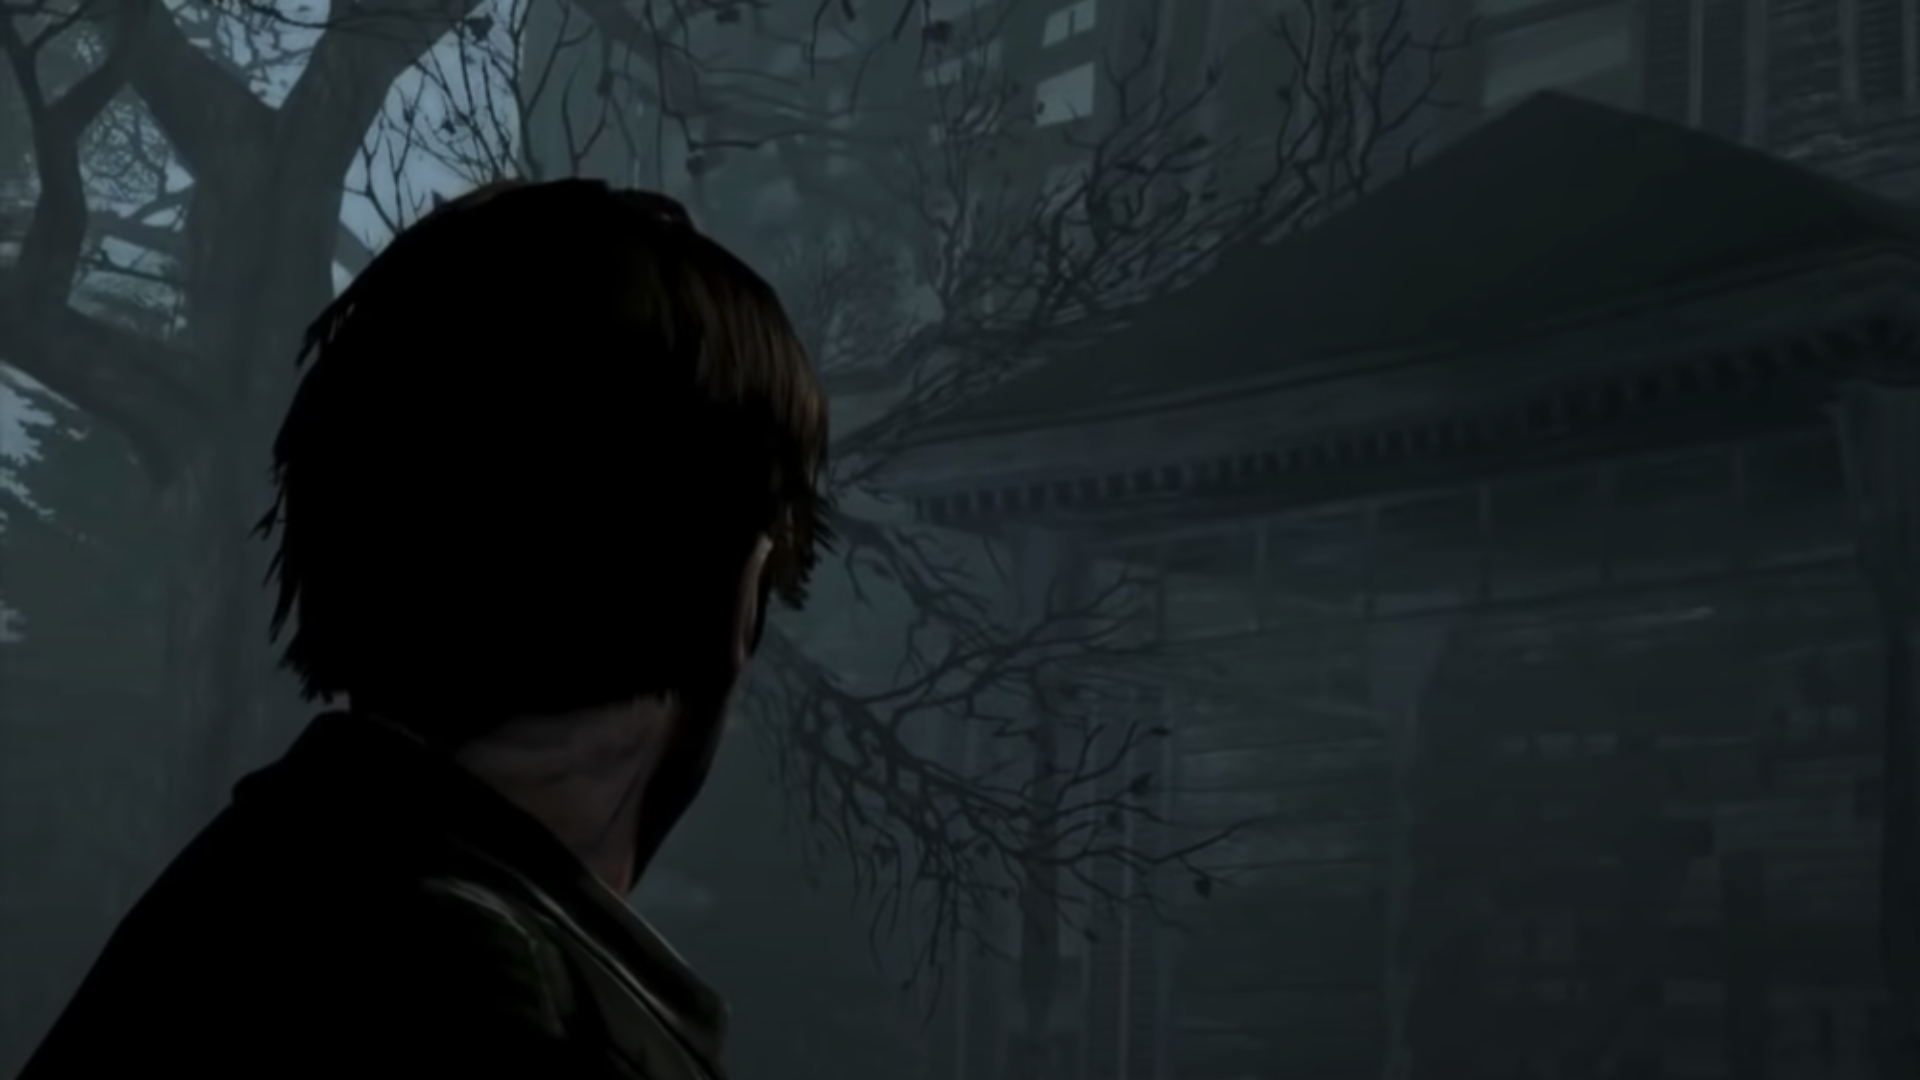 It looks like another step is being taken to build a new Silent Hill

